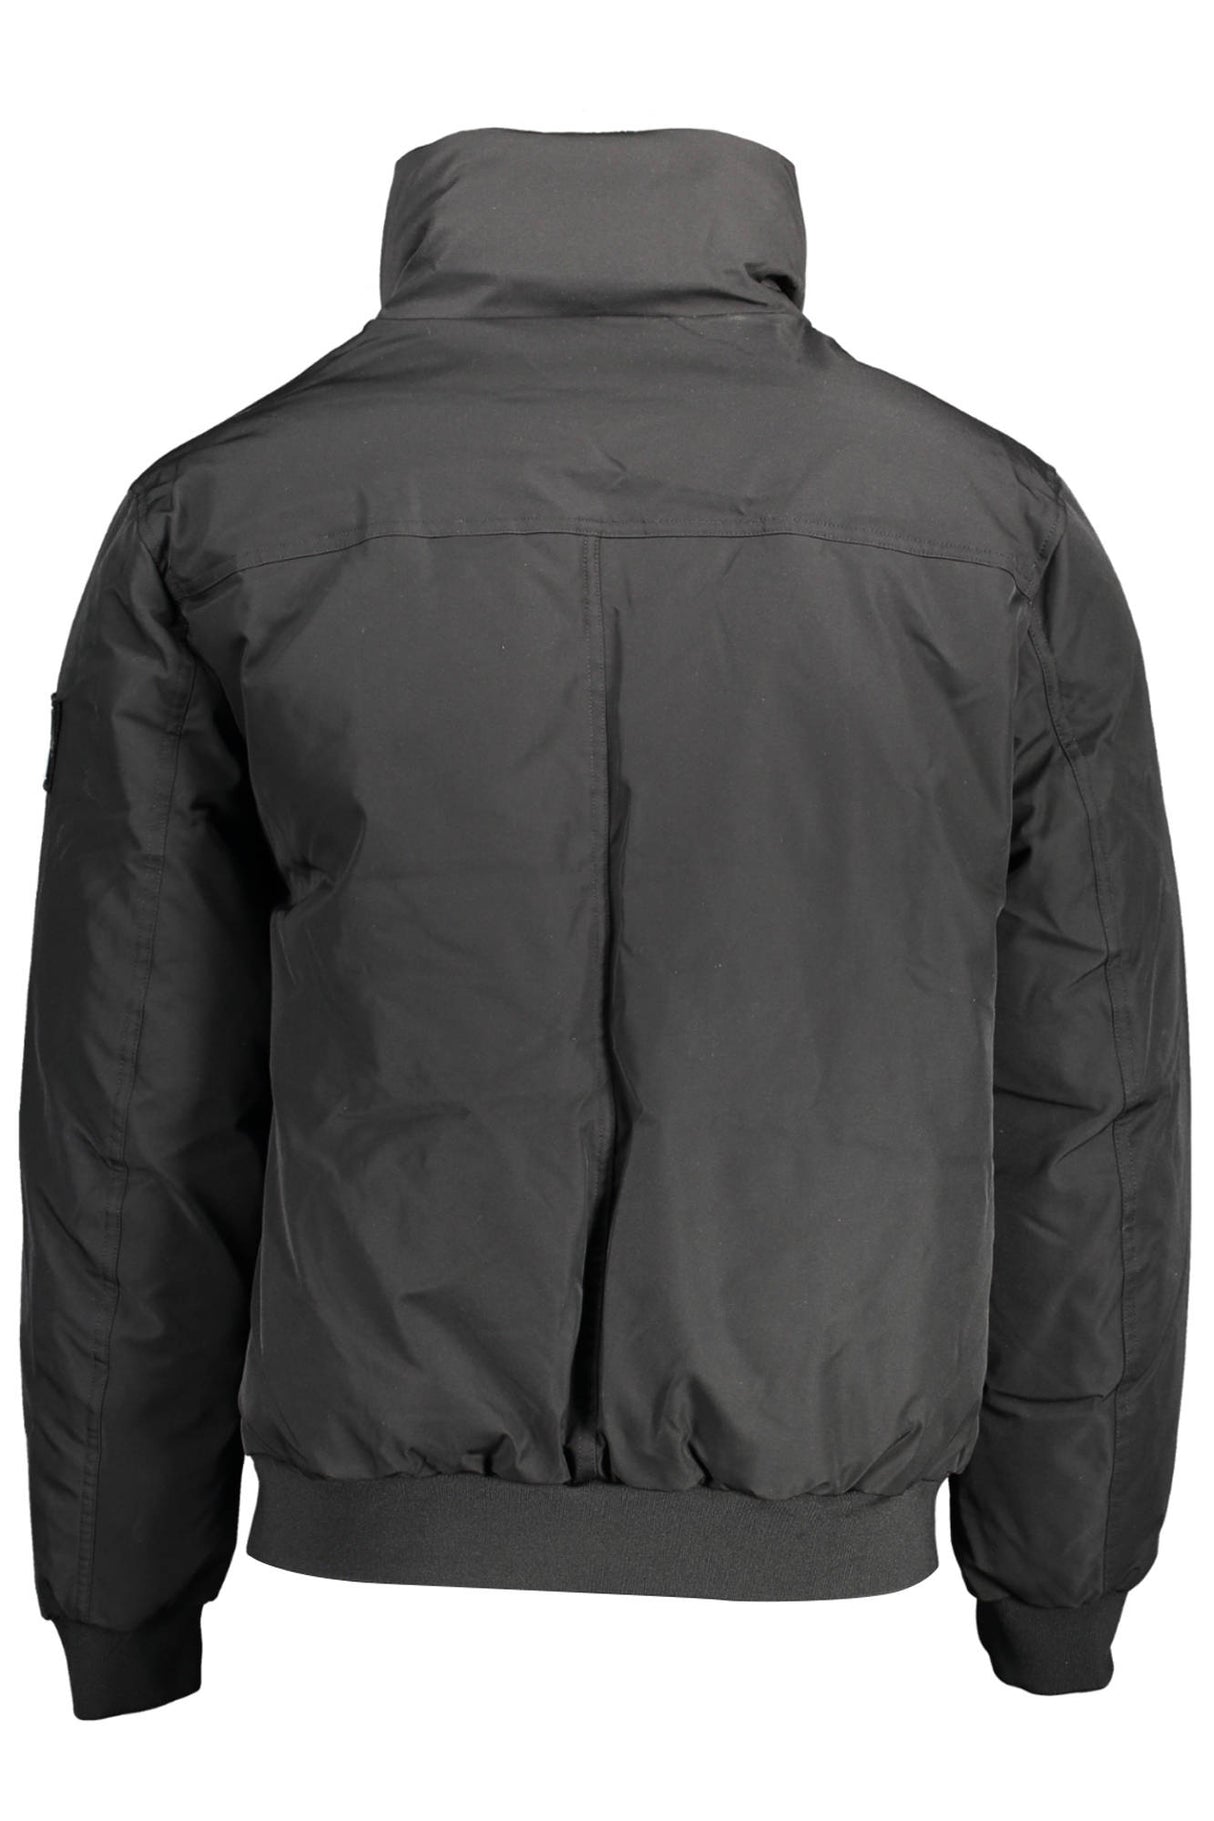 Branded men's jackets from Italy - Buy at the